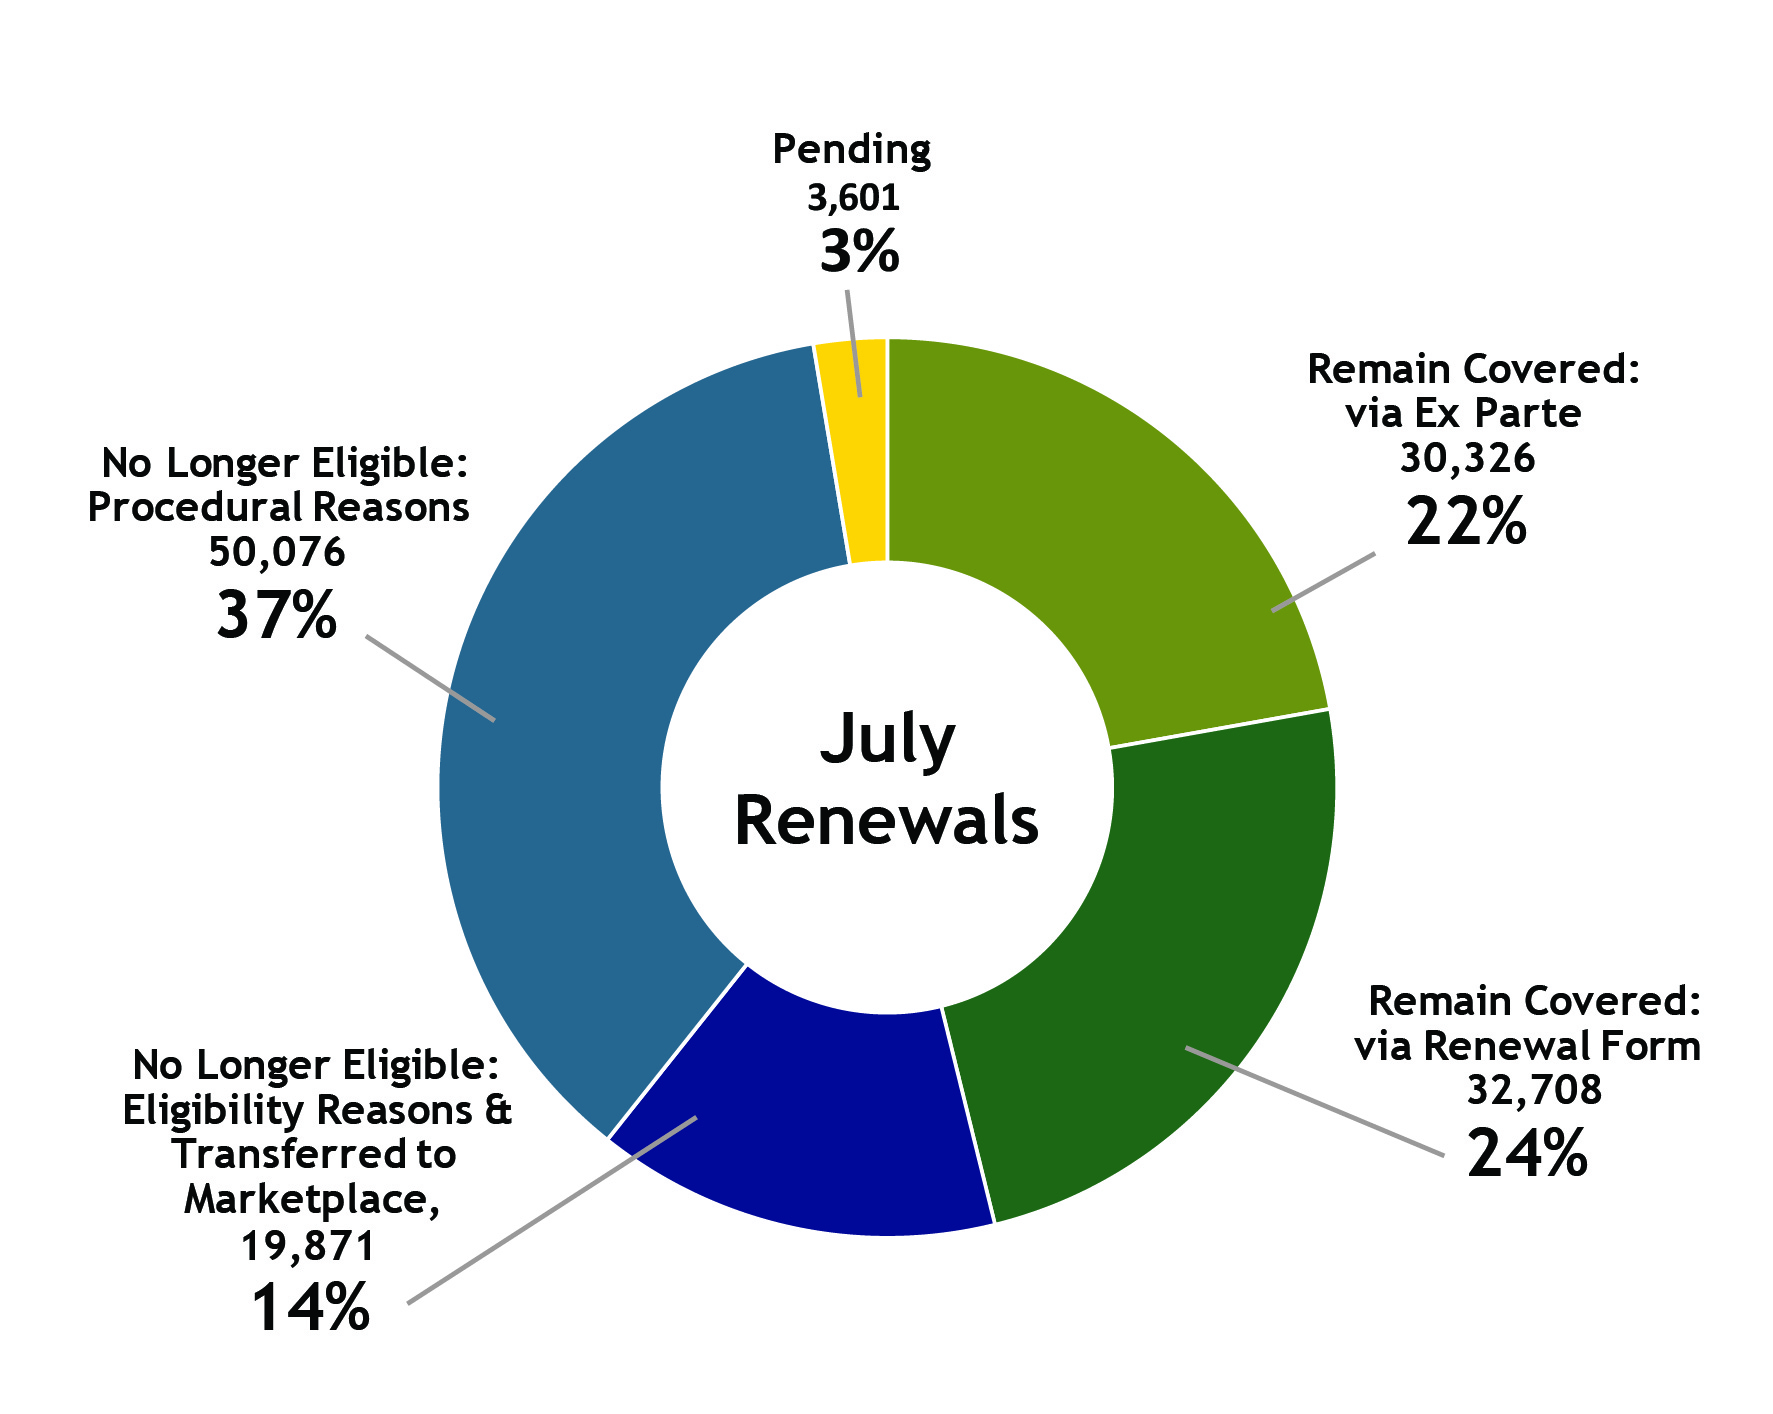 Donut chart displaying July 2023 renewals with those remaining covered via renewal form 32,708 at 24%, remain covered via ex parte 30,326 at 22%, no longer eligible and transferred to marketplace 19,871 at 14%, no longer eligible for procedural reasons 50,076 at 37% and pending 3,601 at 3%.